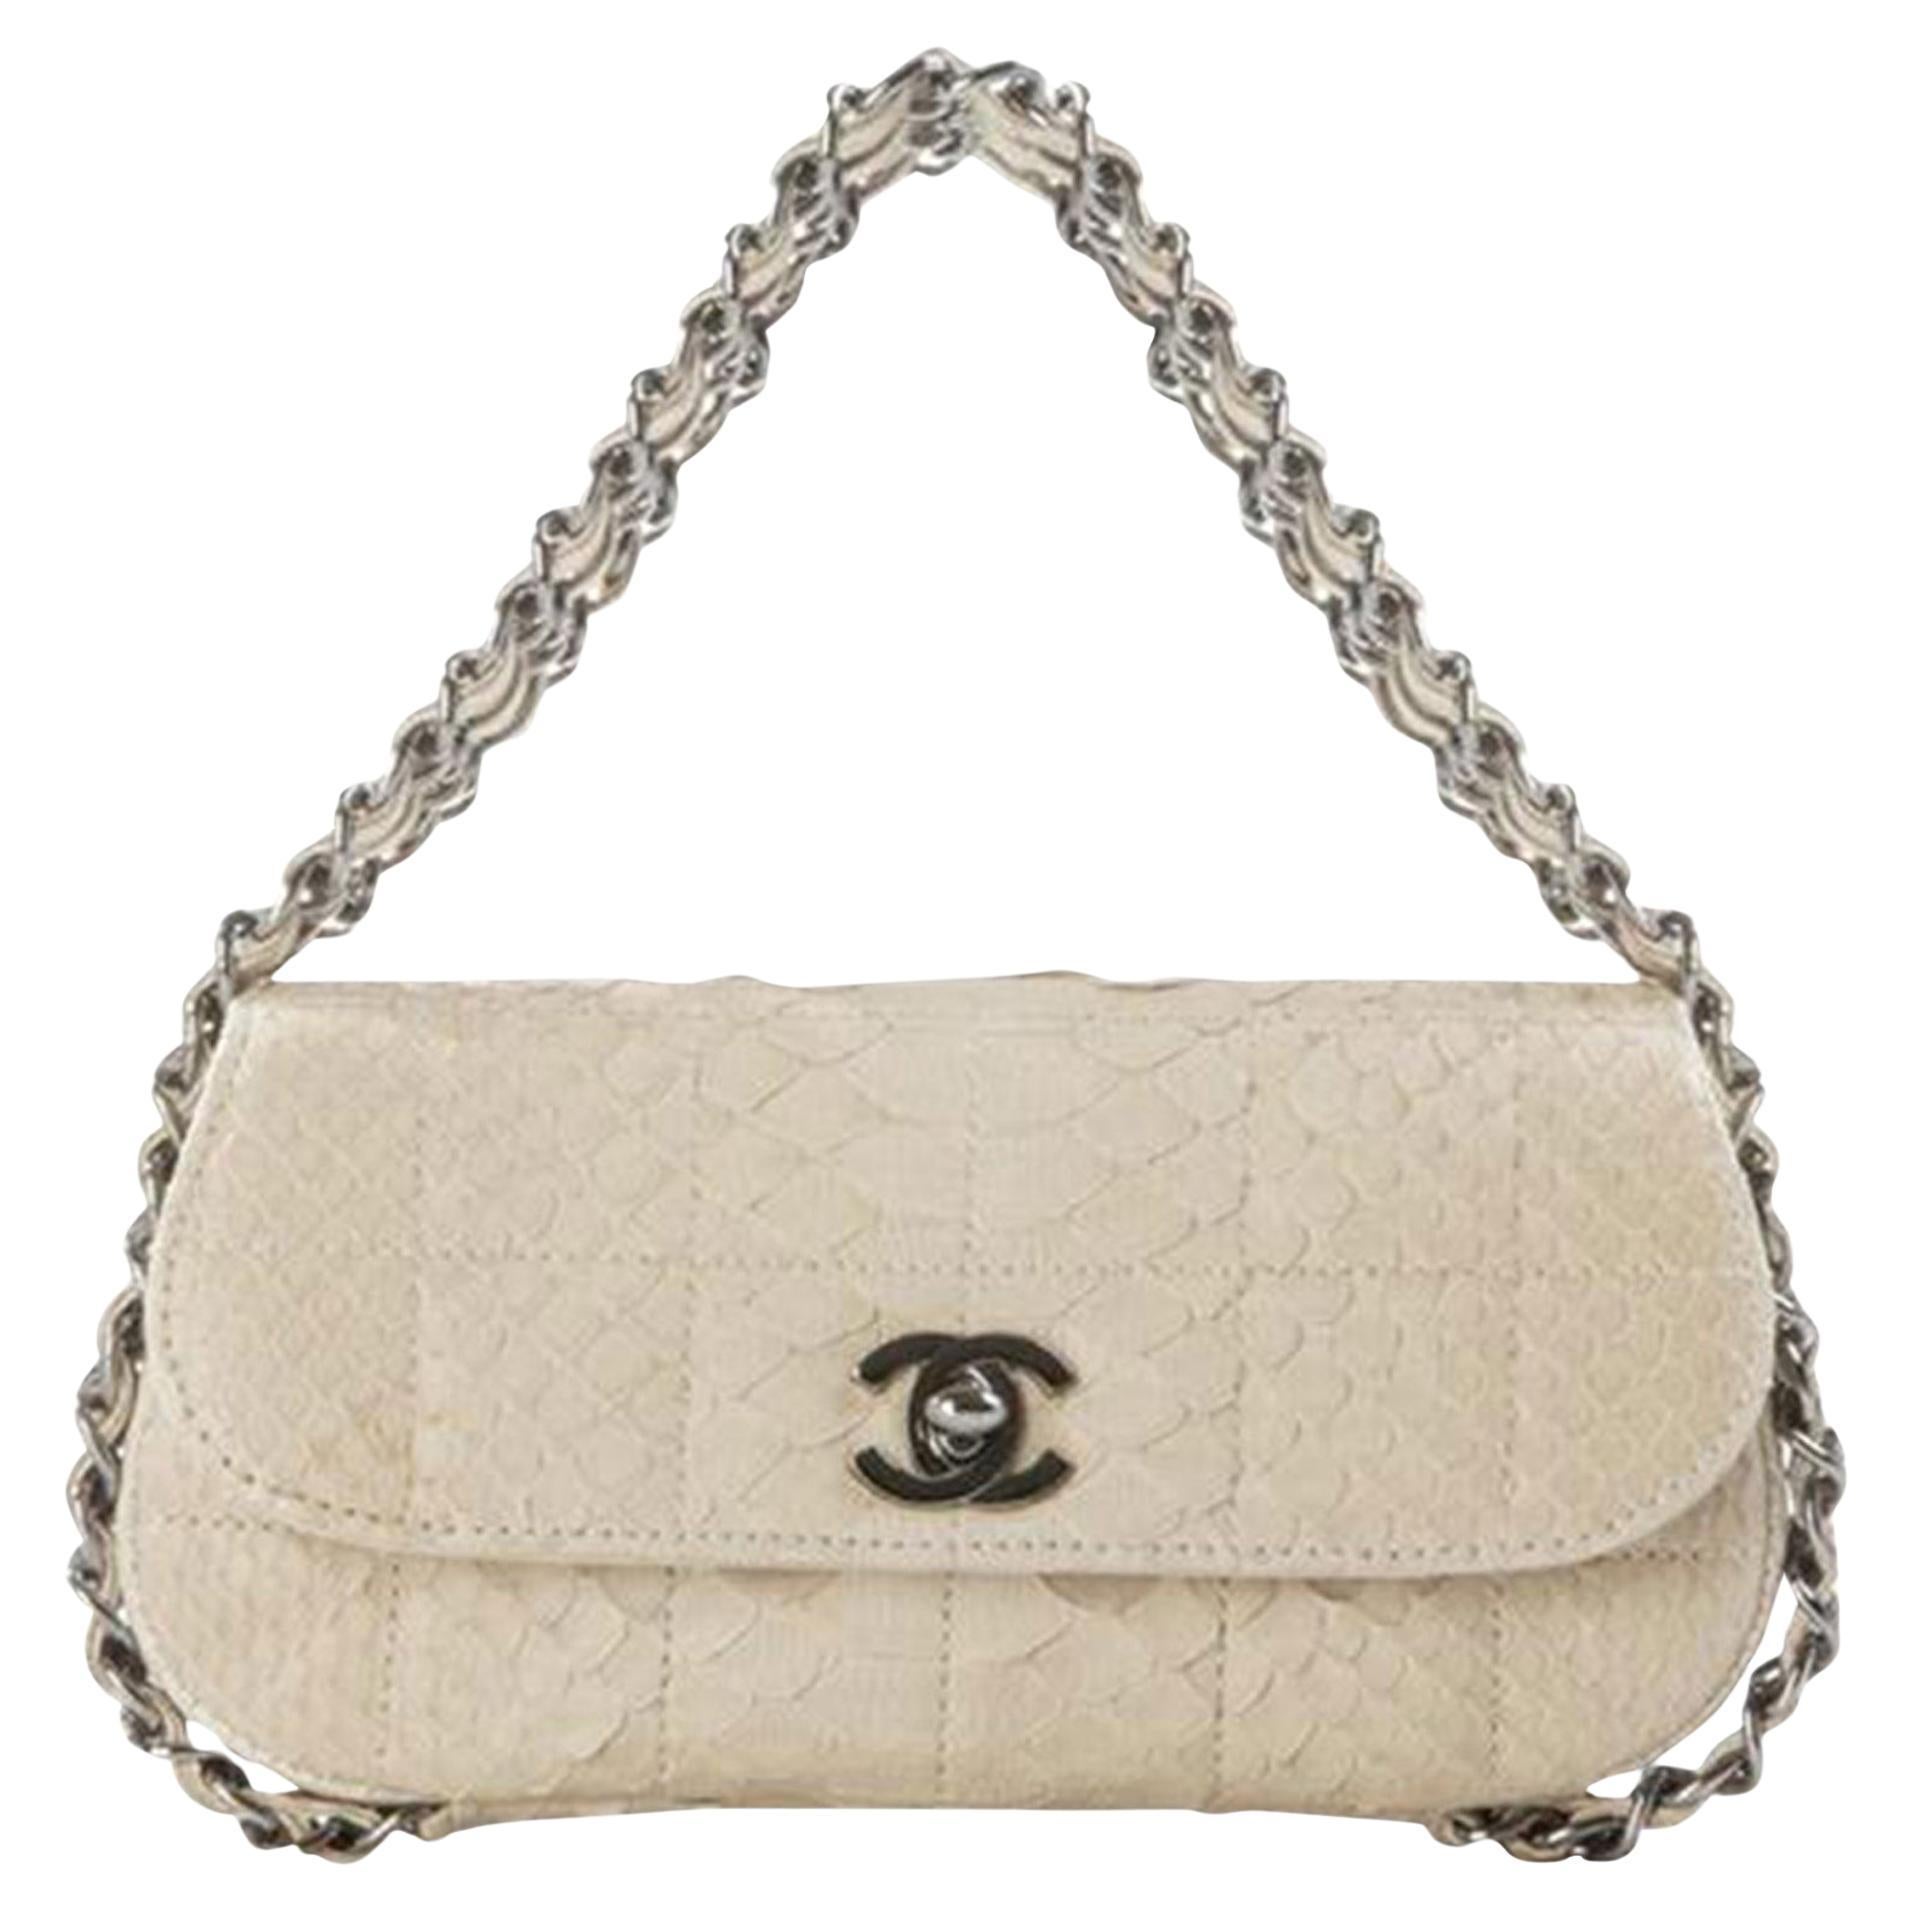 chanel flap bag with top handle pink